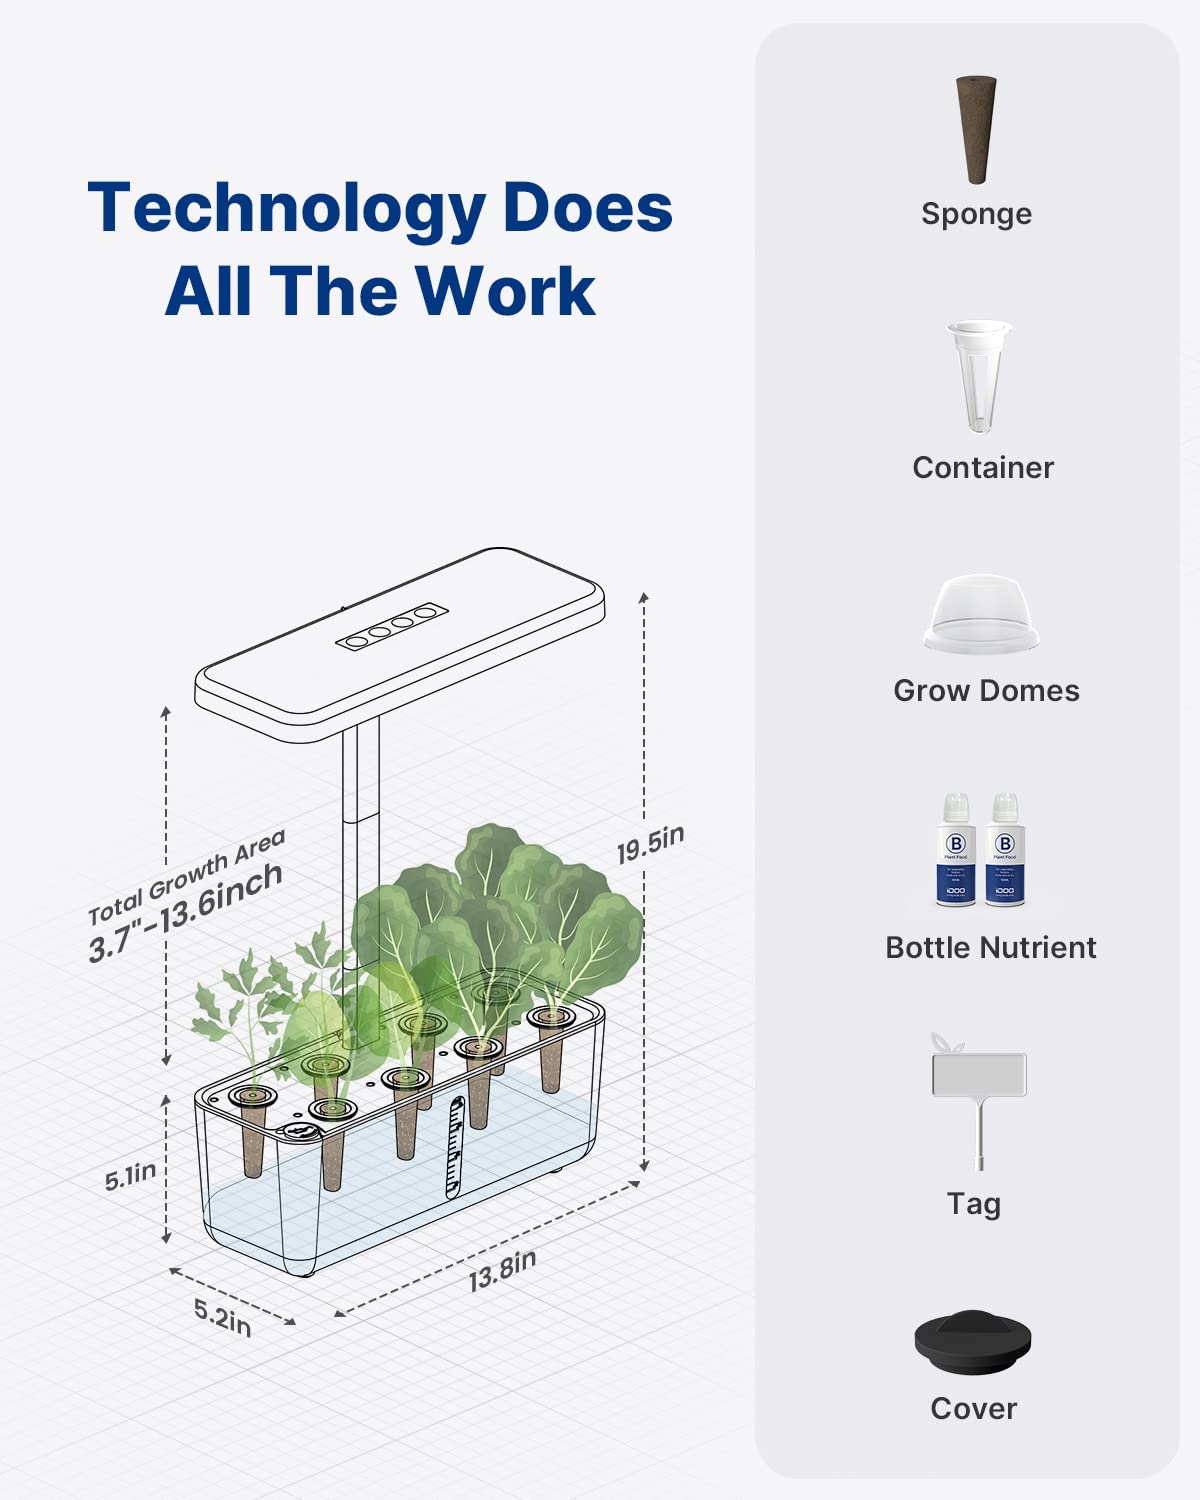 IDOO 8Pods WiFi Indoor Garden with APP Controlled - 8 Pods _wf_cus BFD CA Hydroponic Growing System Wifi by idoo